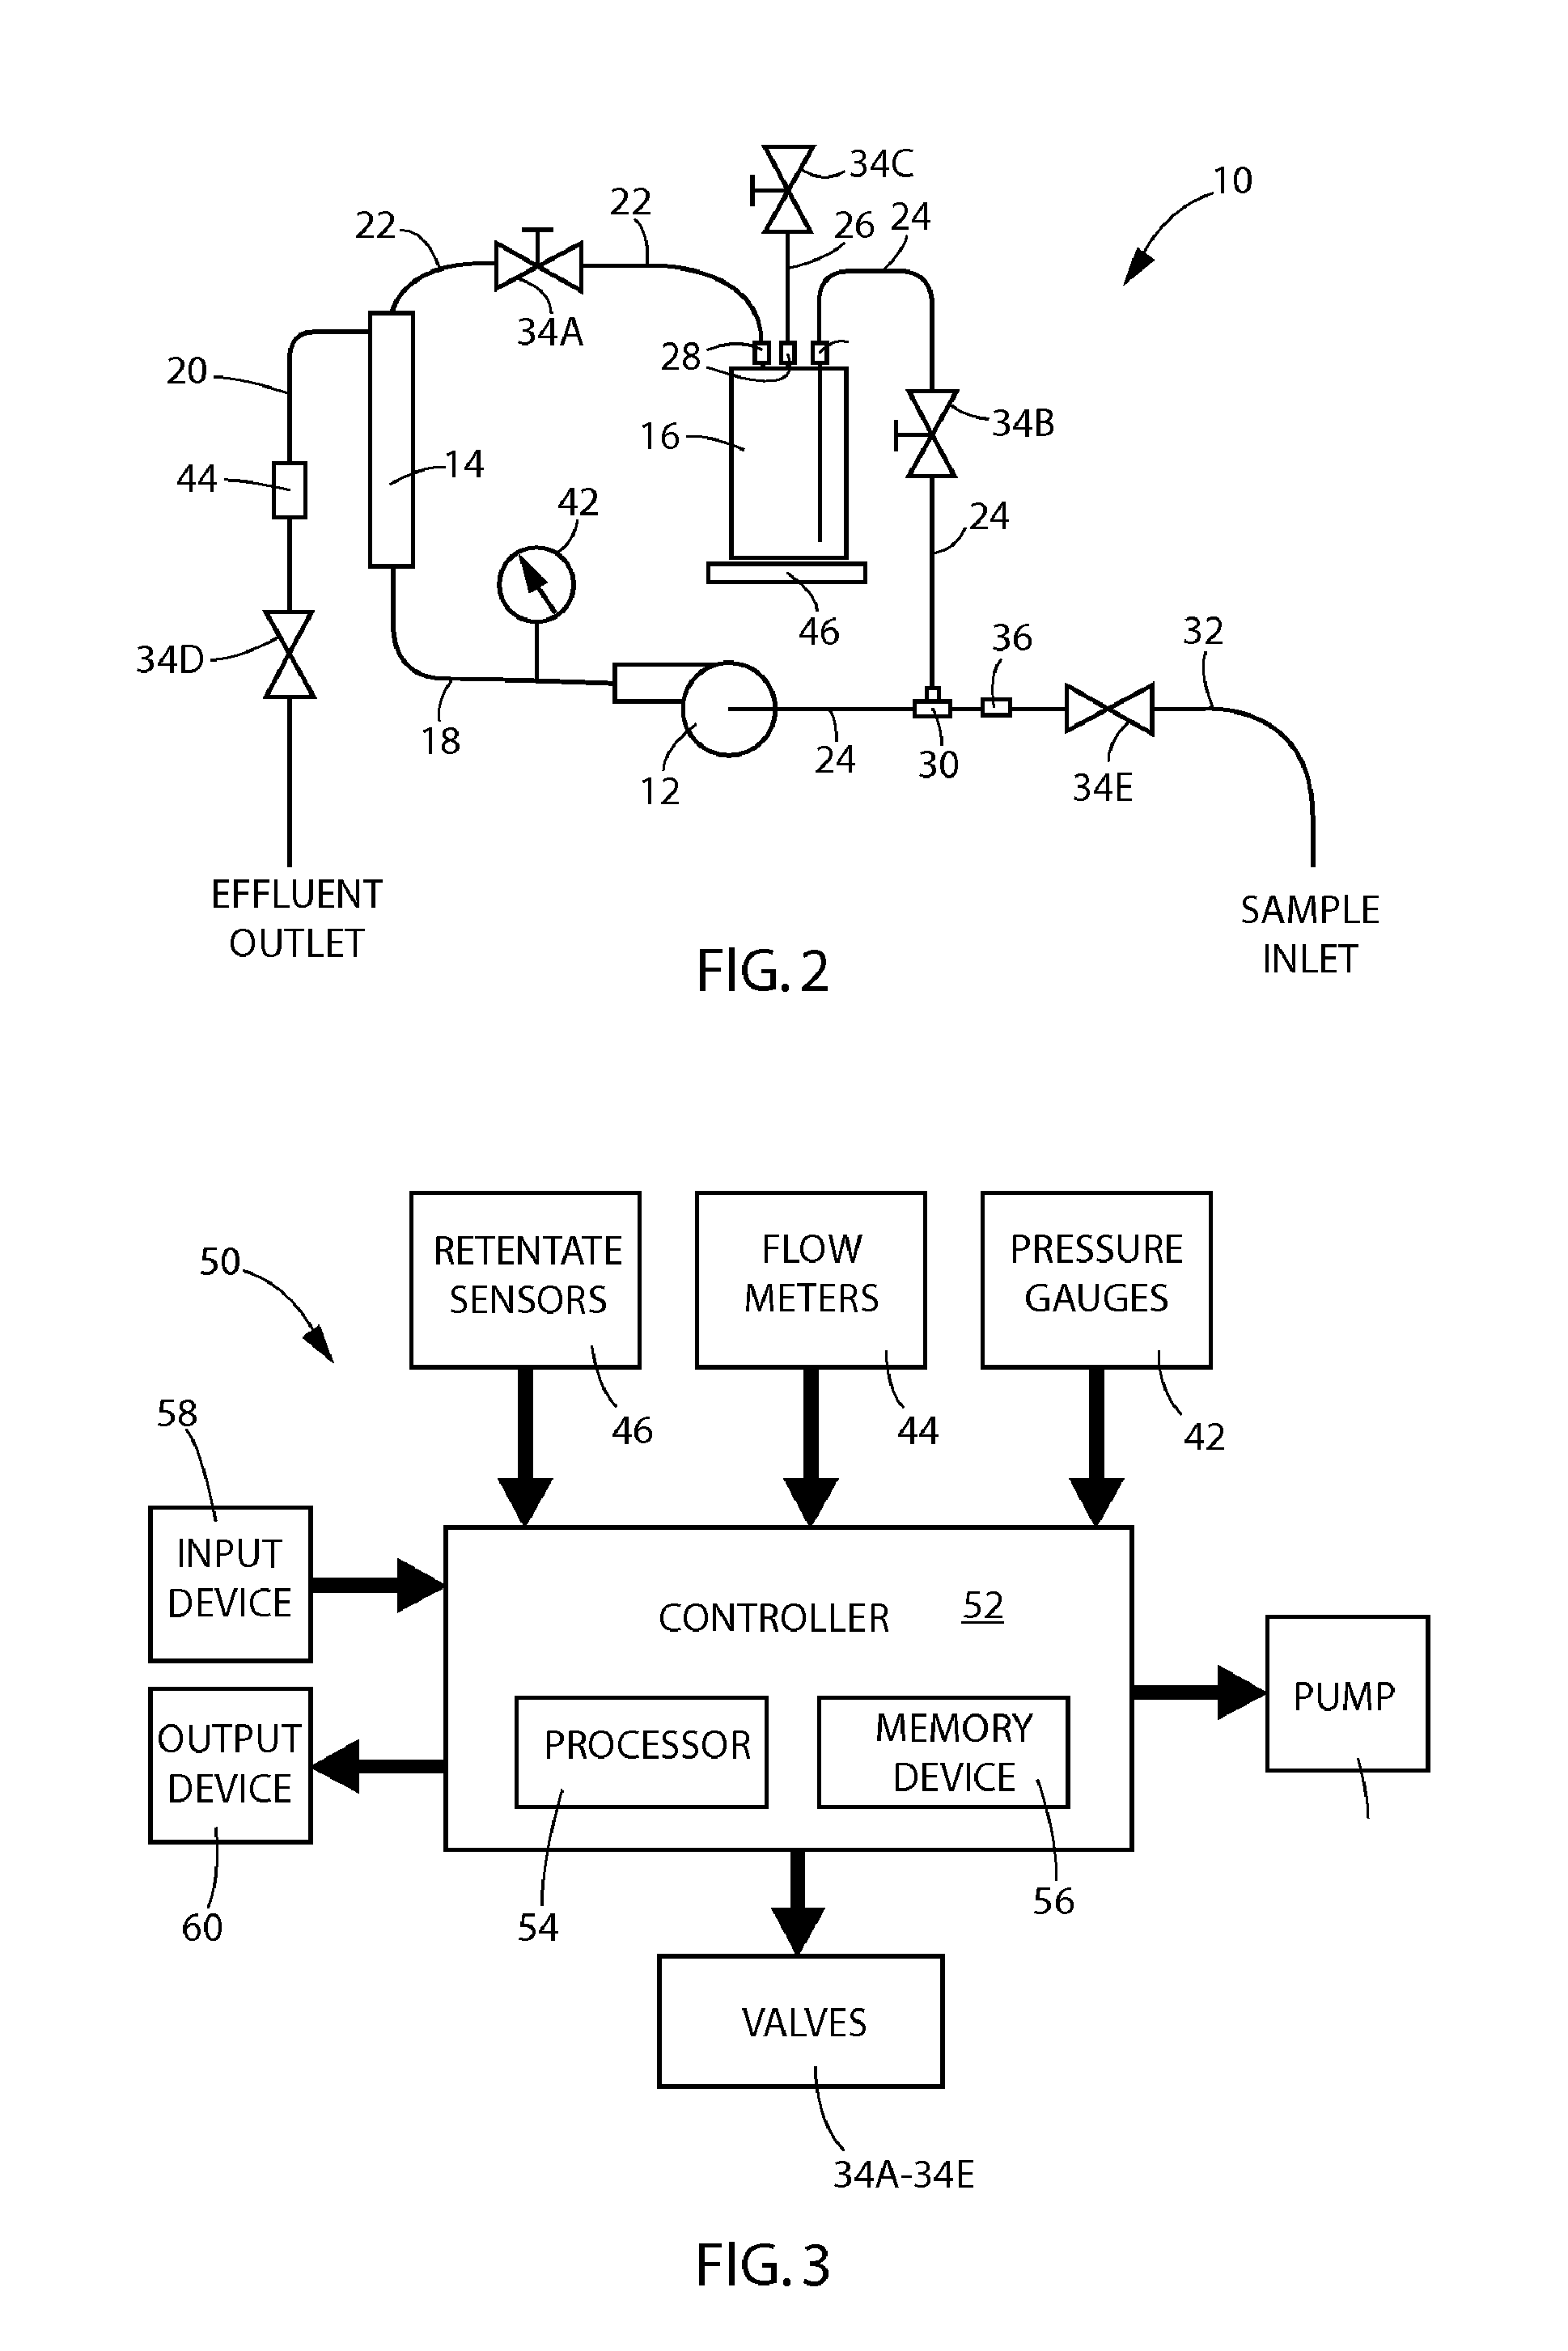 Systems and Methods for the Detection of Low-Level Harmful Substances in a Large Volume of Fluid